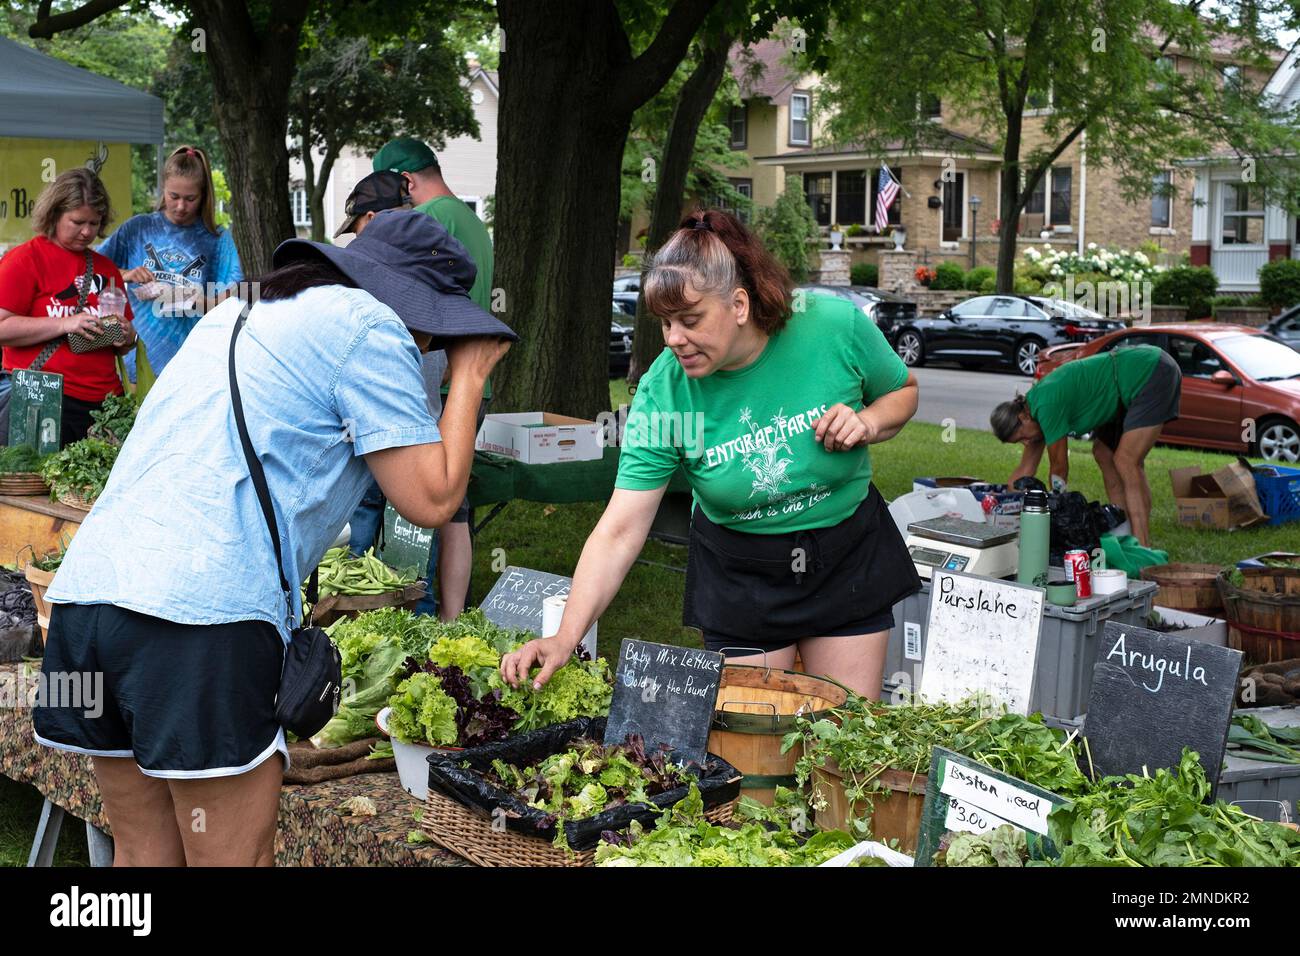 A customer looks at the lettuce for sale at a Farmer's Market in South Shore Park in Milwaukee, Wisconsin, USA. Stock Photo